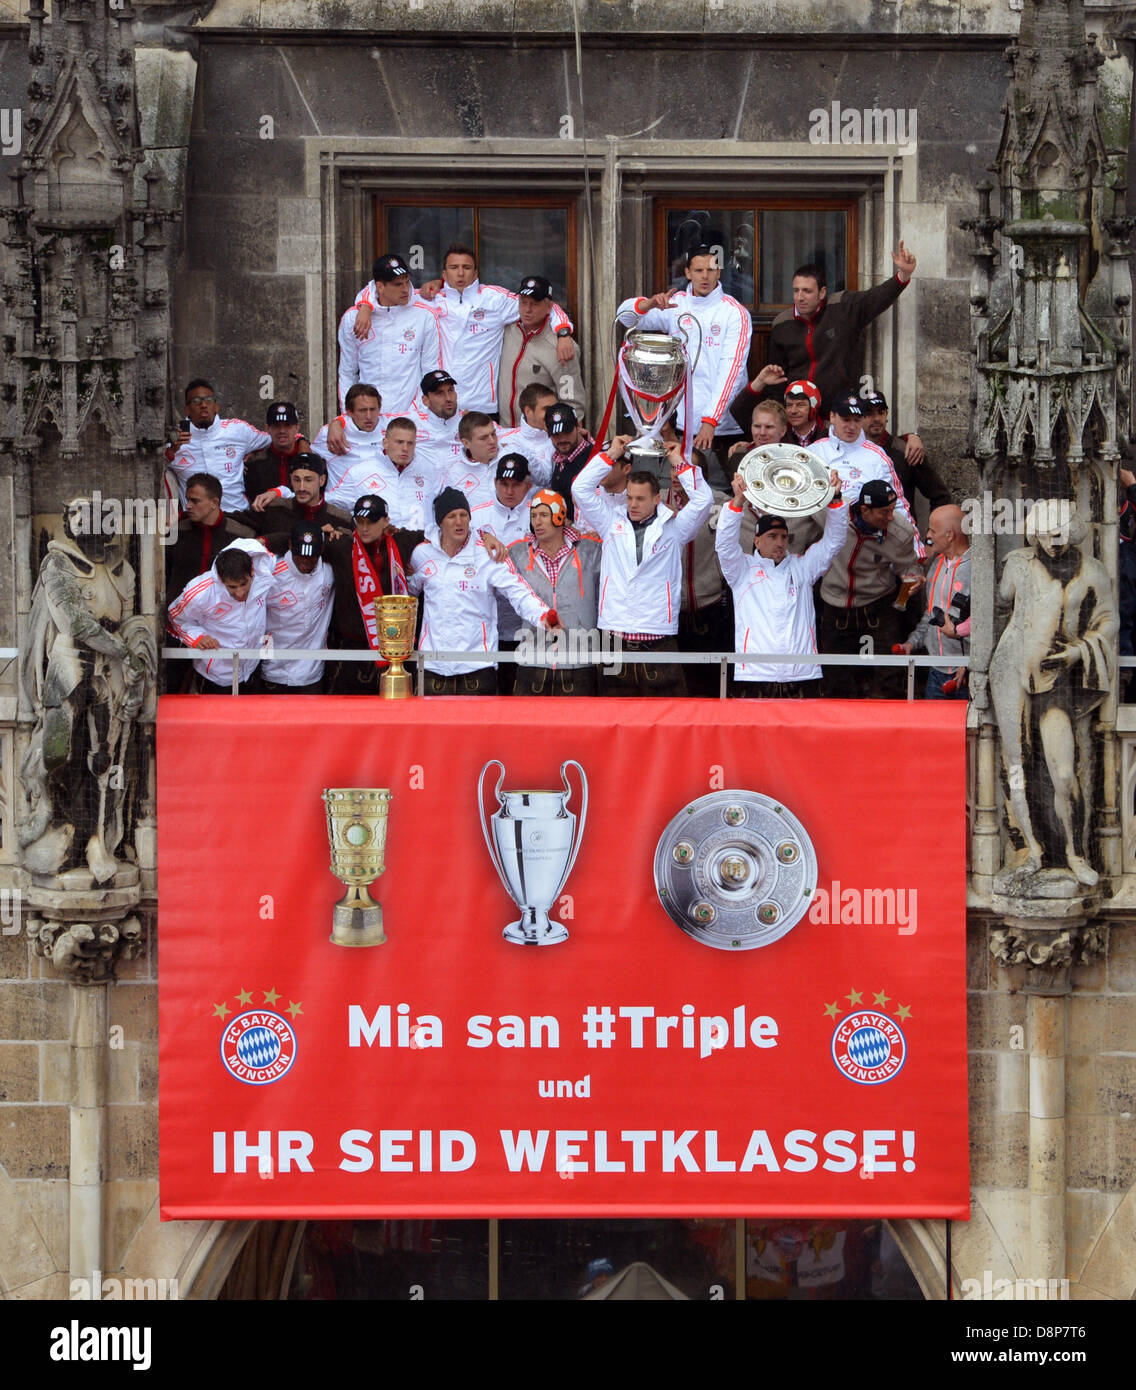 Munich, Germany. 2nd June, 2013. Bayern's players celebrate on the balcony of the town hall in Munich, Germany, 02 June 2013. FC Bayern Munich wins German Championship, Champions League and DFB Cup for the season 2012/13. PHOTO: PETER KNEFFEL/dpa/Alamy Live News Stock Photo